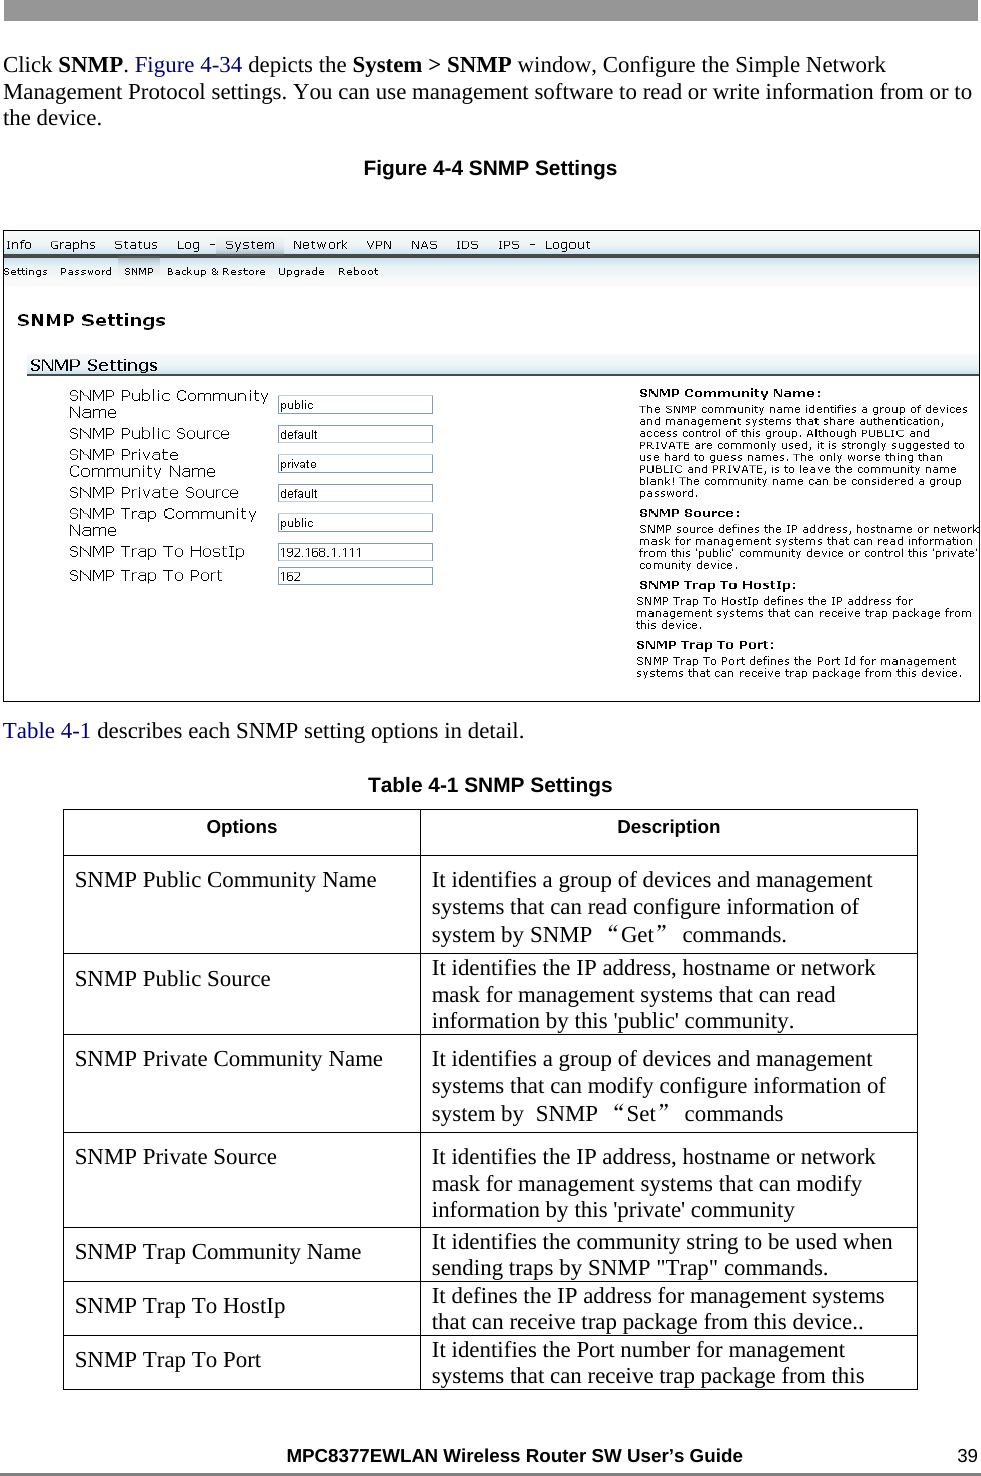                                                          MPC8377EWLAN Wireless Router SW User’s Guide    39 Click SNMP. Figure 4-34 depicts the System &gt; SNMP window, Configure the Simple Network Management Protocol settings. You can use management software to read or write information from or to the device. Figure 4-4 SNMP Settings   Table 4-1 describes each SNMP setting options in detail. Table 4-1 SNMP Settings Options Description SNMP Public Community Name  It identifies a group of devices and management systems that can read configure information of system by SNMP “Get” commands. SNMP Public Source  It identifies the IP address, hostname or network mask for management systems that can read information by this &apos;public&apos; community. SNMP Private Community Name  It identifies a group of devices and management systems that can modify configure information of system by  SNMP “Set” commands SNMP Private Source  It identifies the IP address, hostname or network mask for management systems that can modify information by this &apos;private&apos; community SNMP Trap Community Name  It identifies the community string to be used when sending traps by SNMP &quot;Trap&quot; commands. SNMP Trap To HostIp  It defines the IP address for management systems that can receive trap package from this device..  SNMP Trap To Port  It identifies the Port number for management systems that can receive trap package from this 